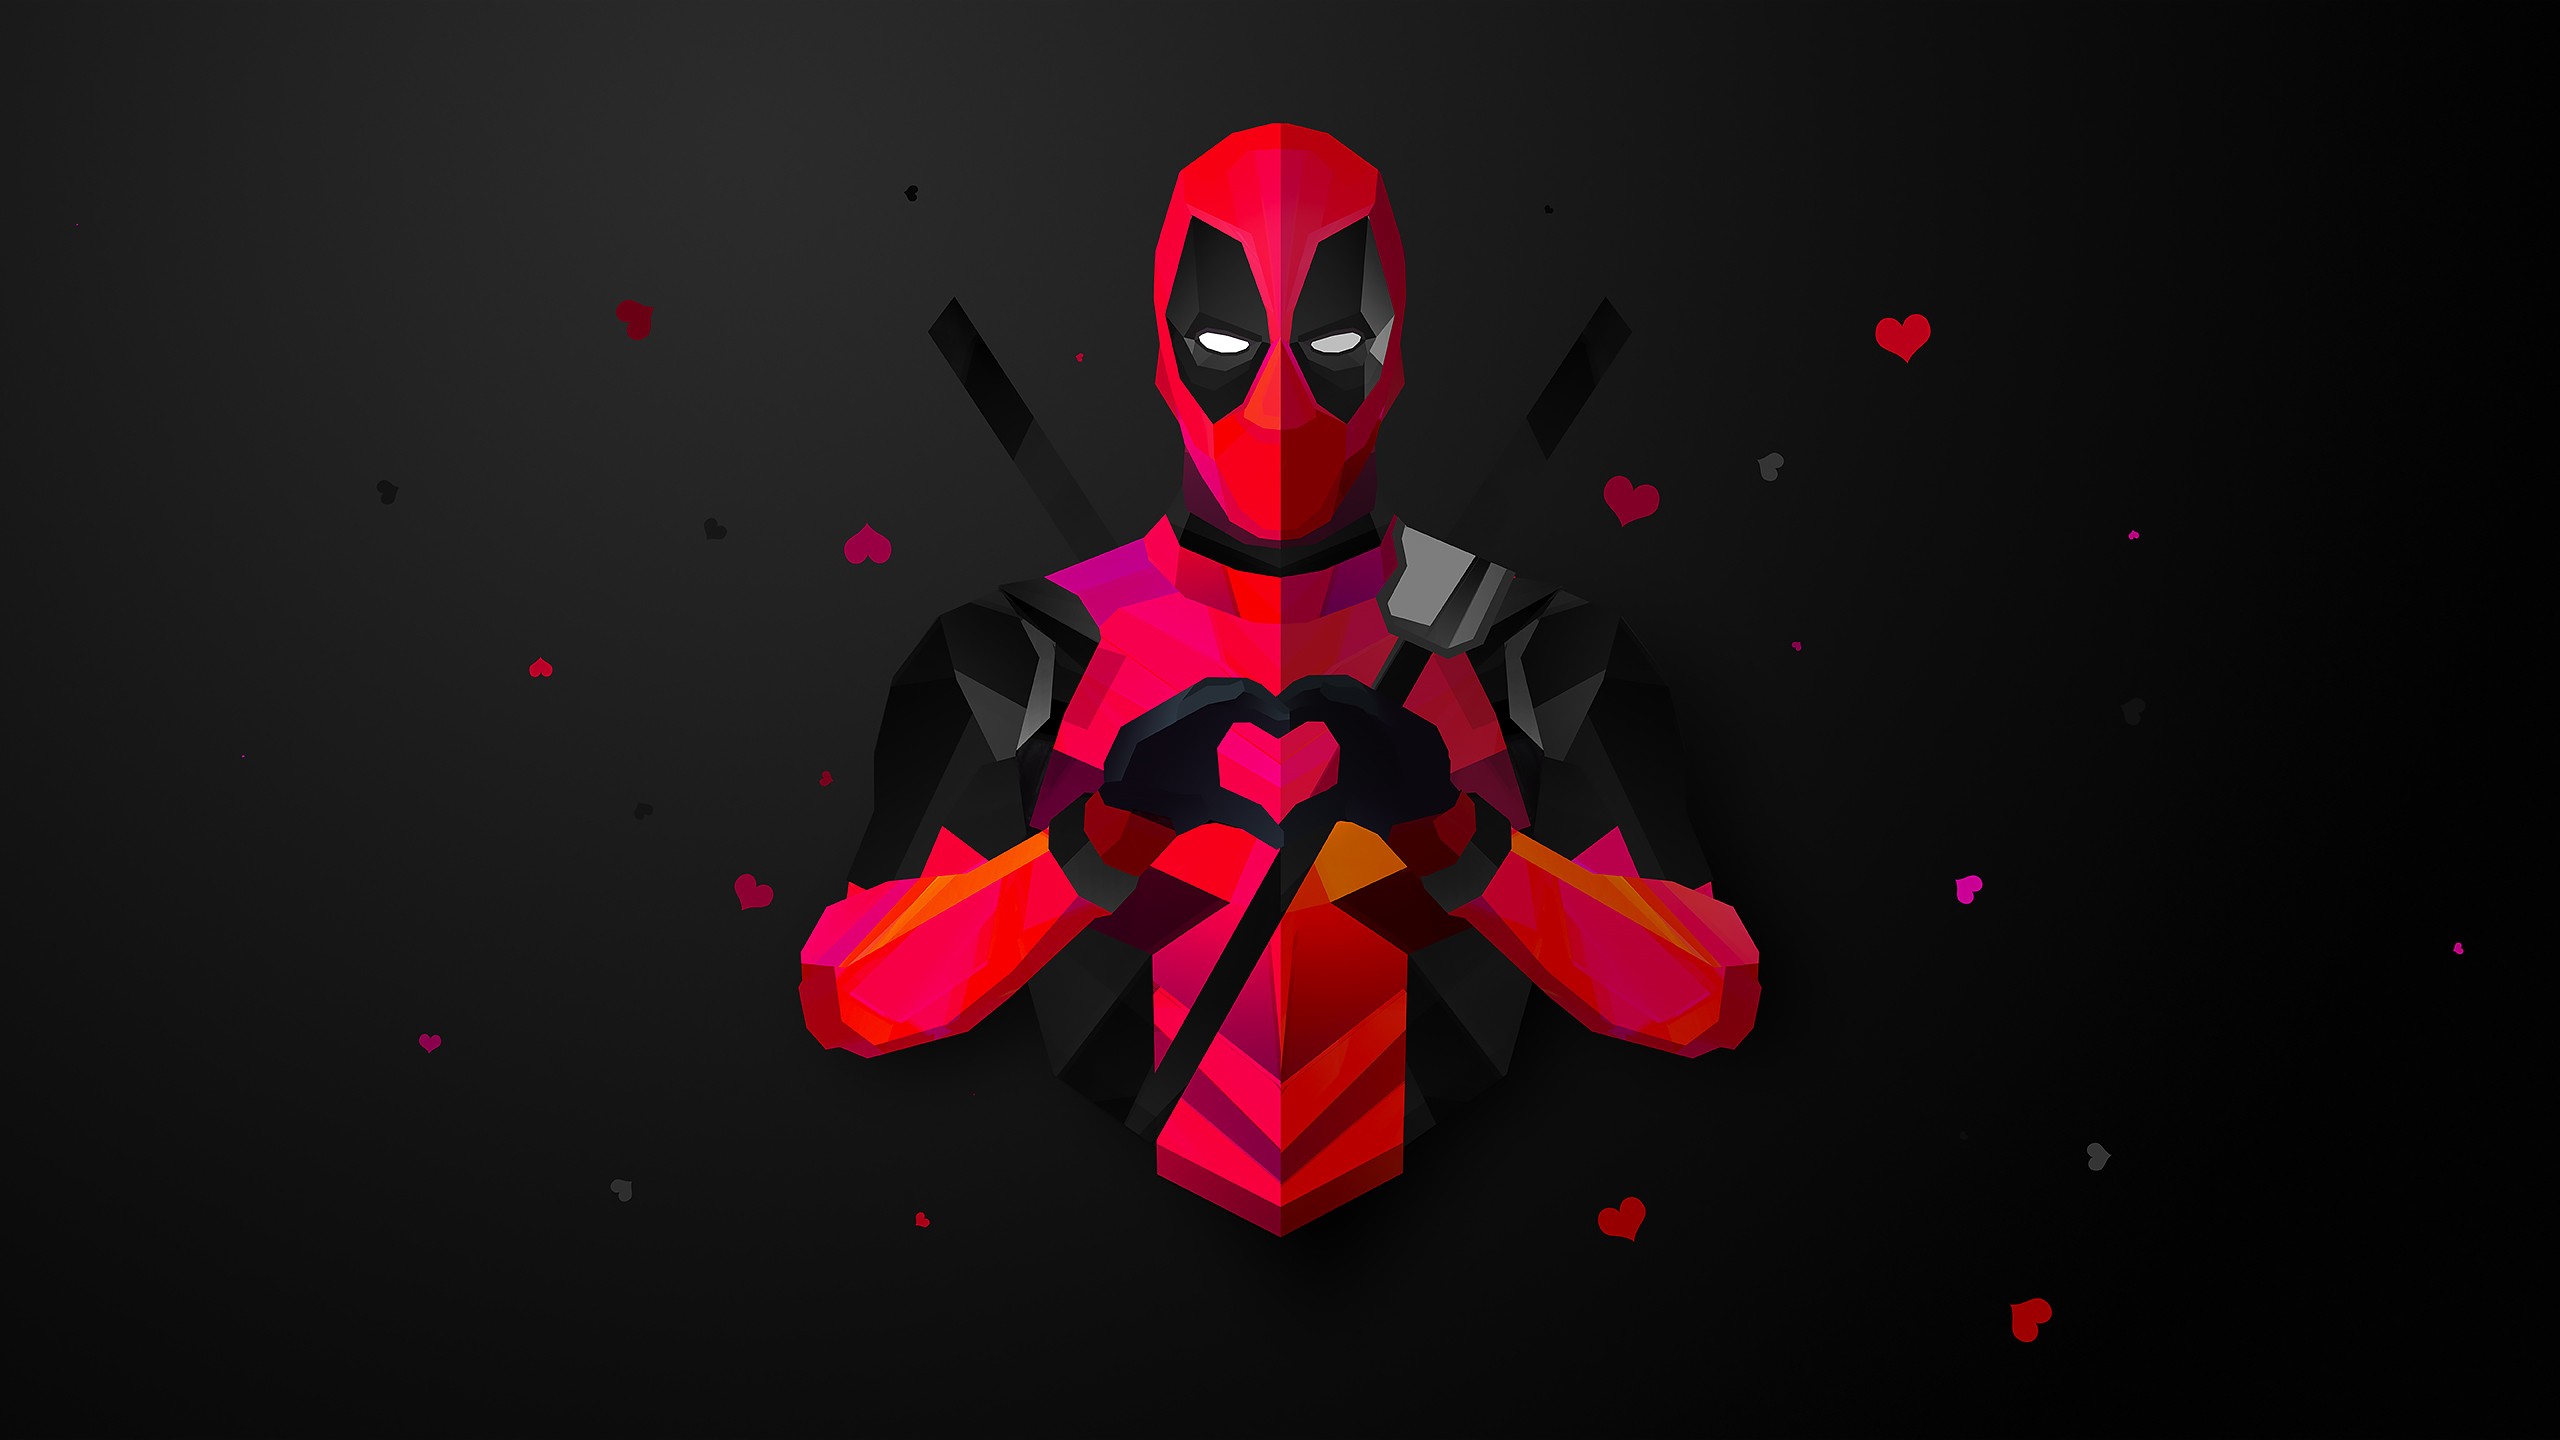 Deadpool Wallpaper Hd Download Free Wallpapers For Desktop Computers And Smartphones In Any